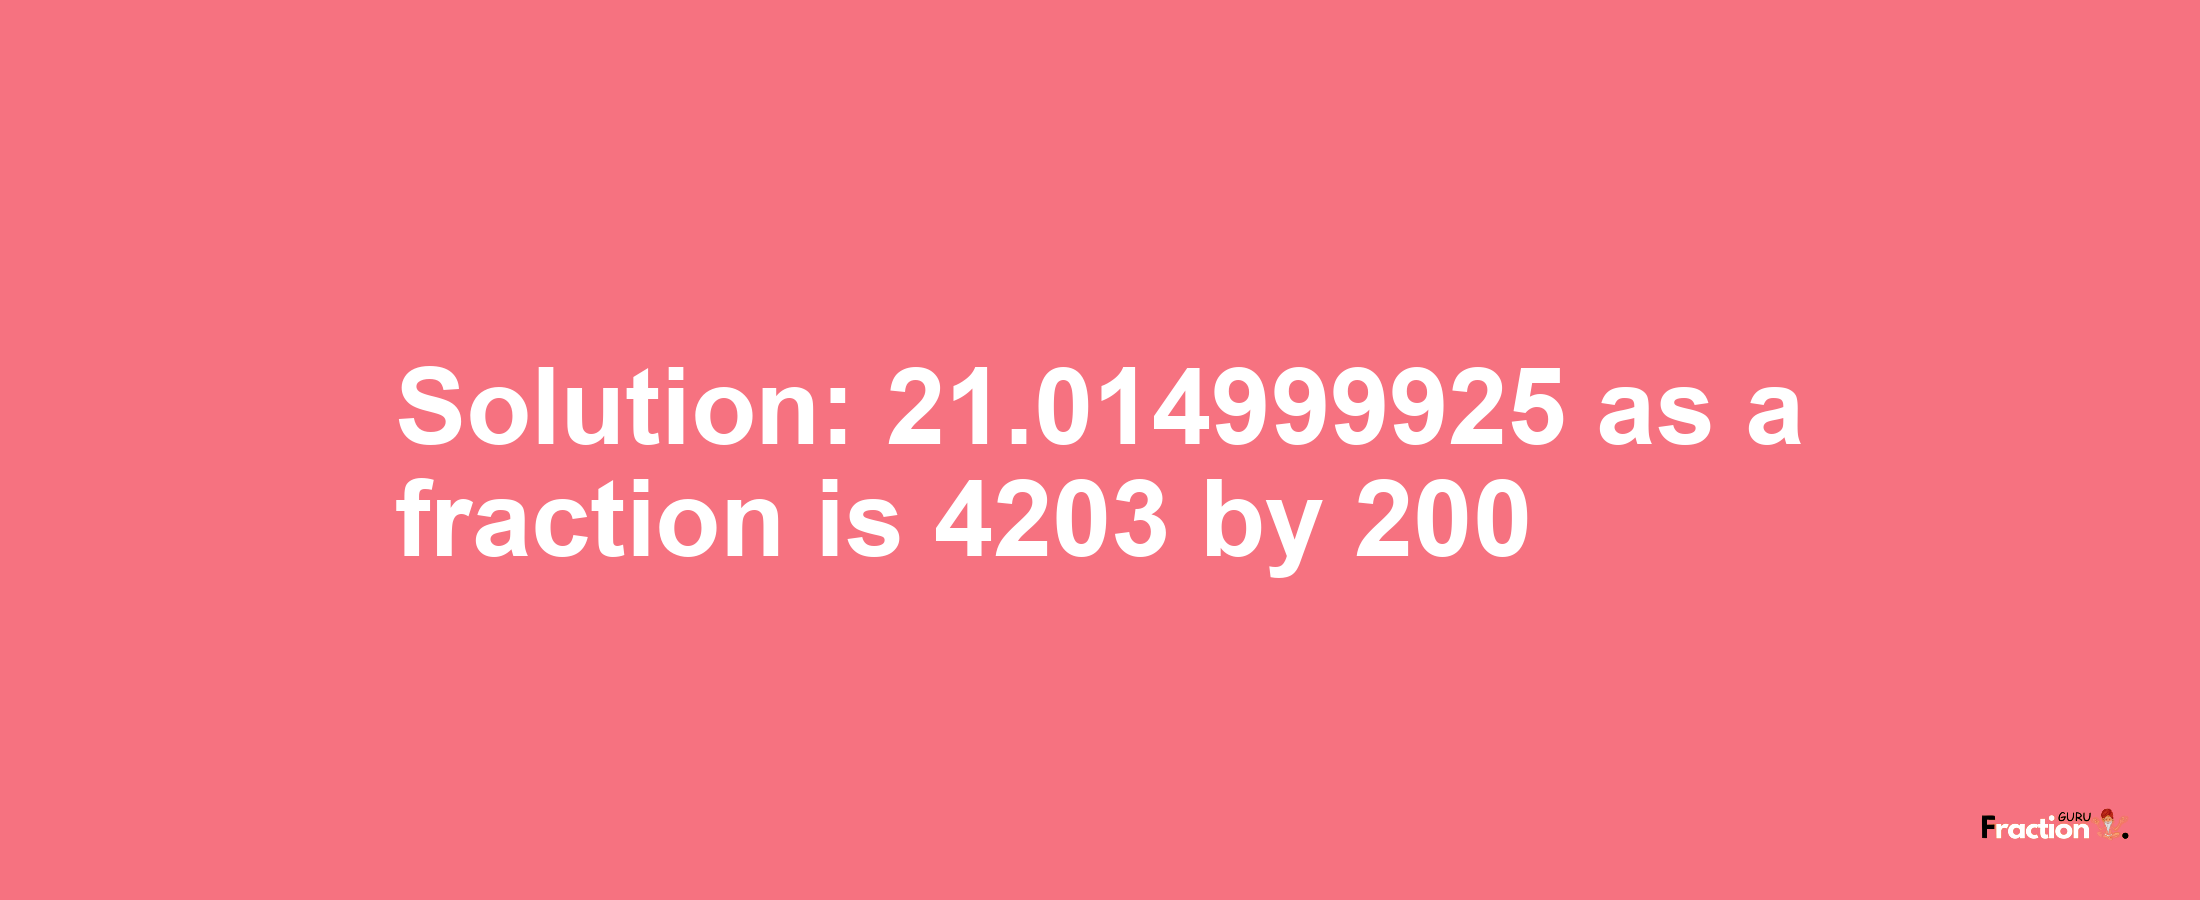 Solution:21.014999925 as a fraction is 4203/200